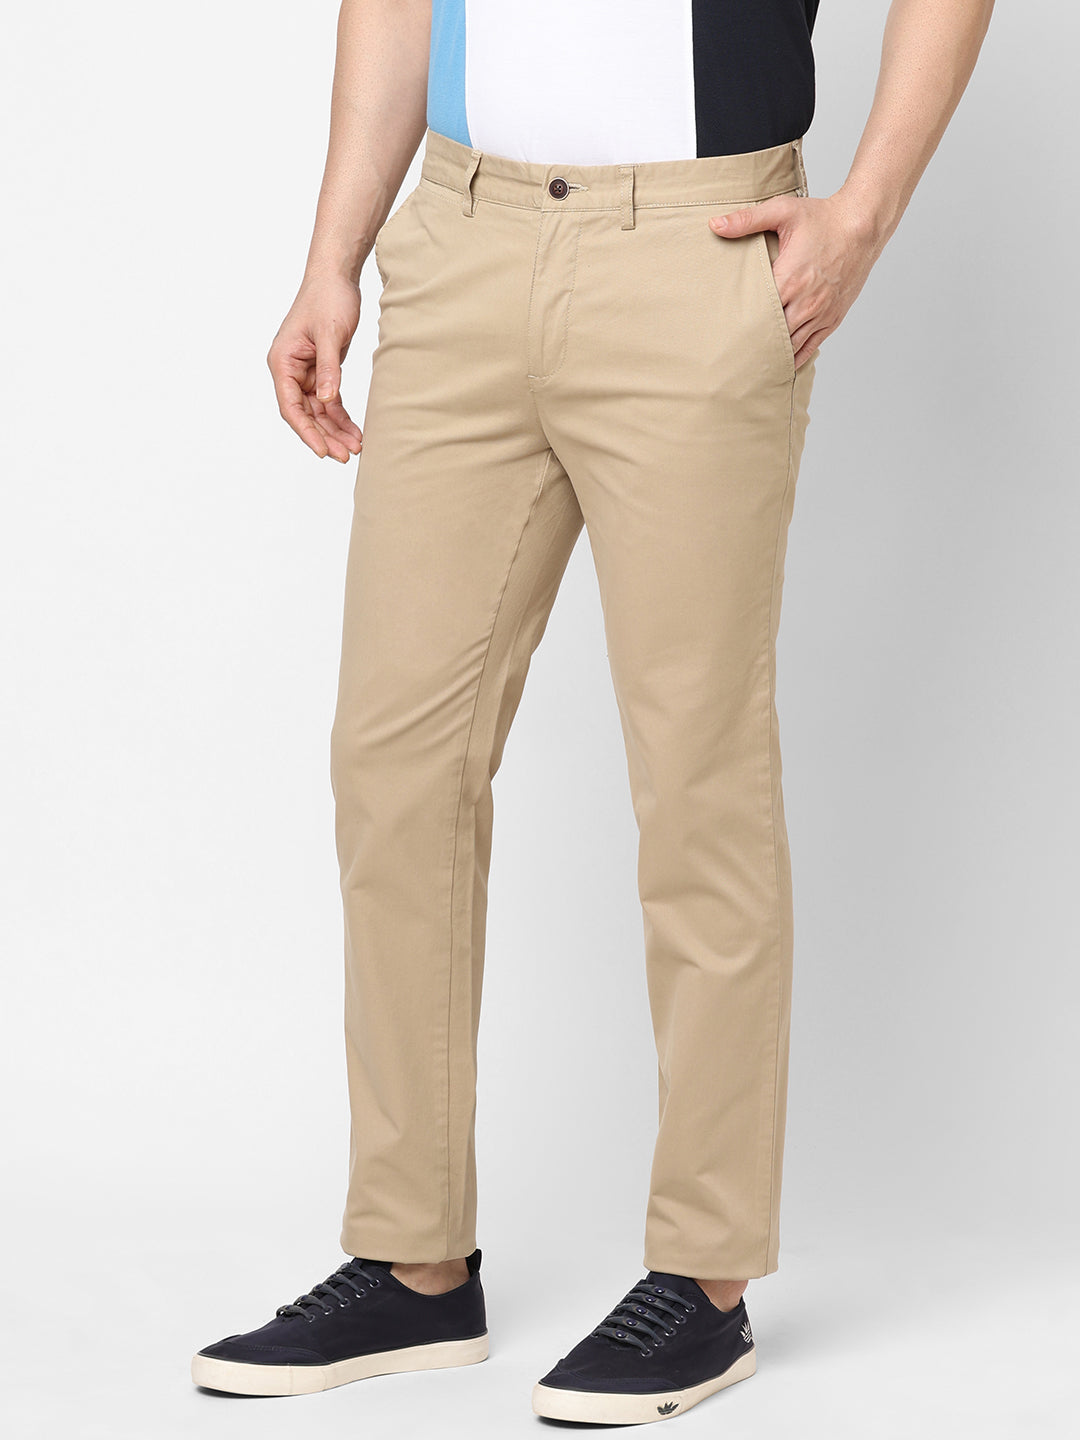 Buy Coral Solid Slim Pants Online - W for Woman